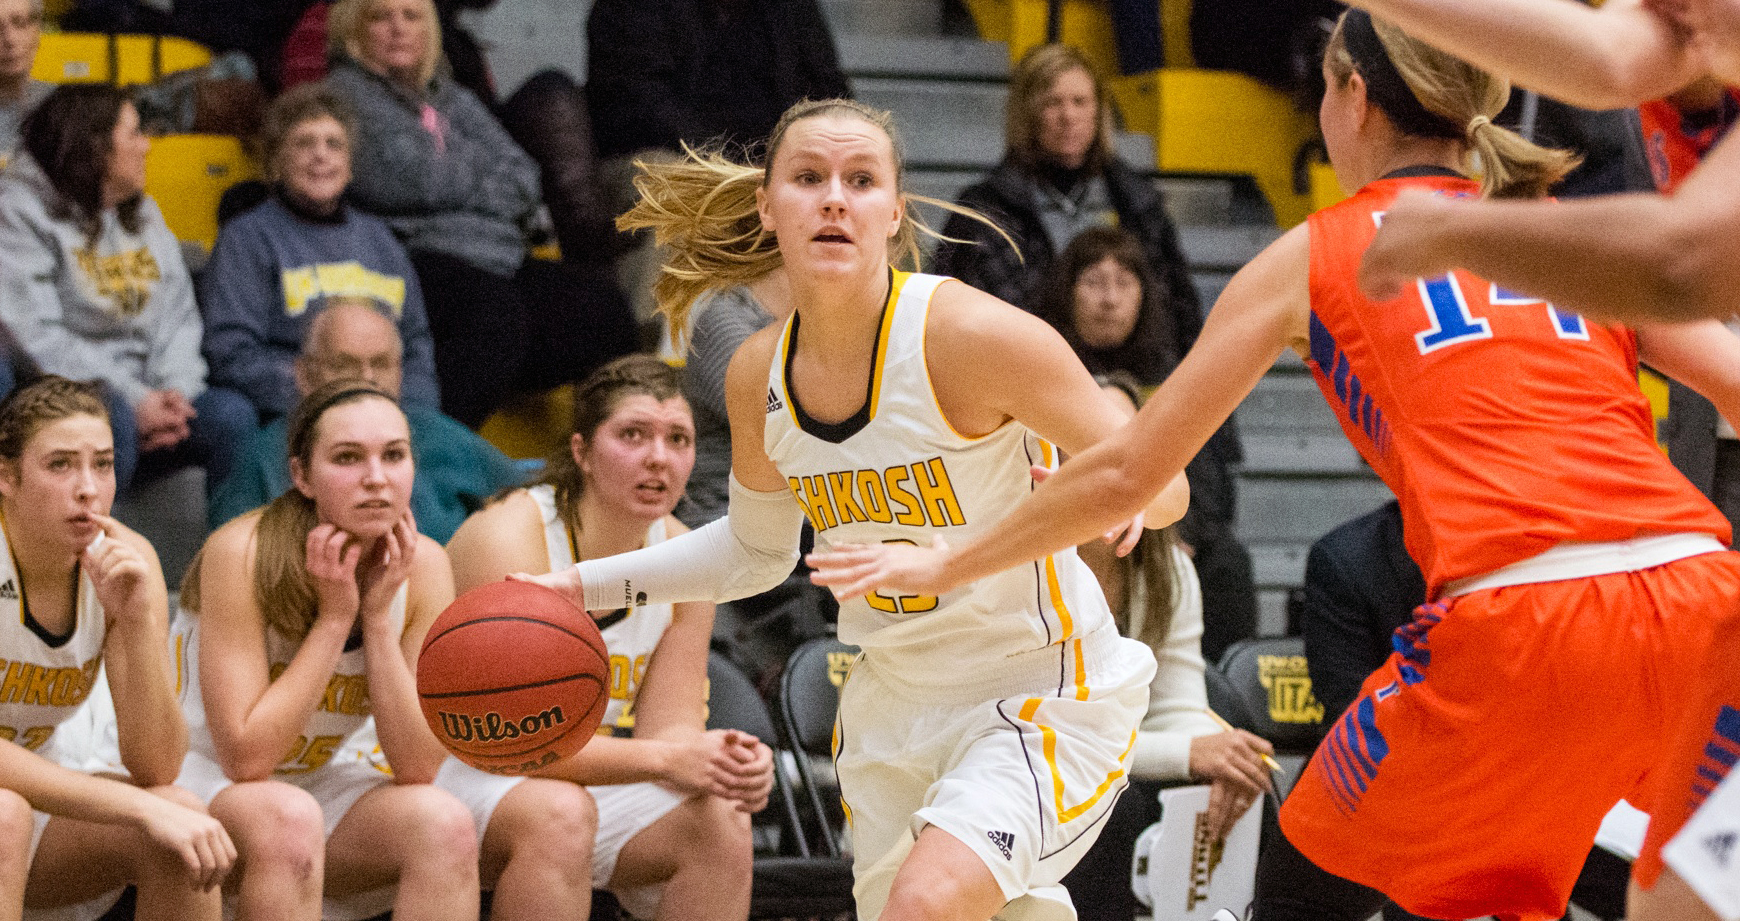 Morgan Kotka scored nine points and was one of three Titans with a team-high six rebounds against the Pioneers.